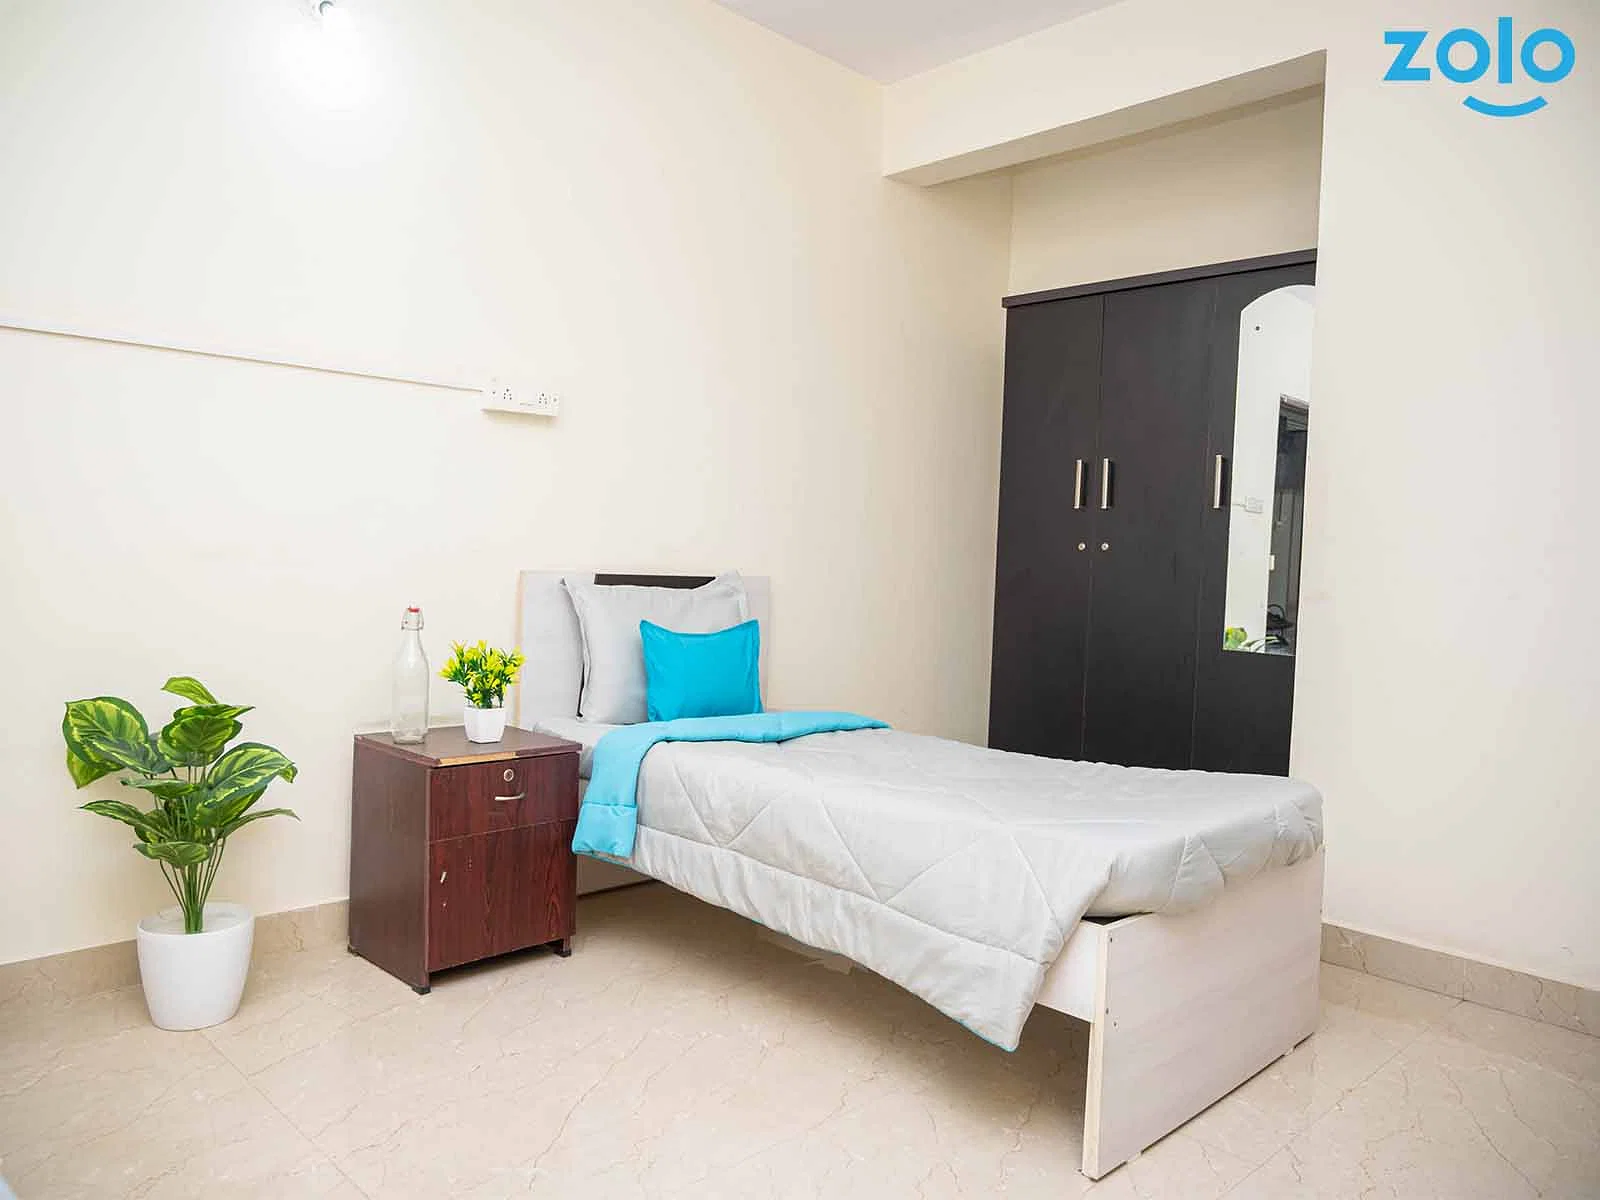 budget-friendly PGs and hostels for boys and girls with single rooms with daily hopusekeeping-Zolo Clapton